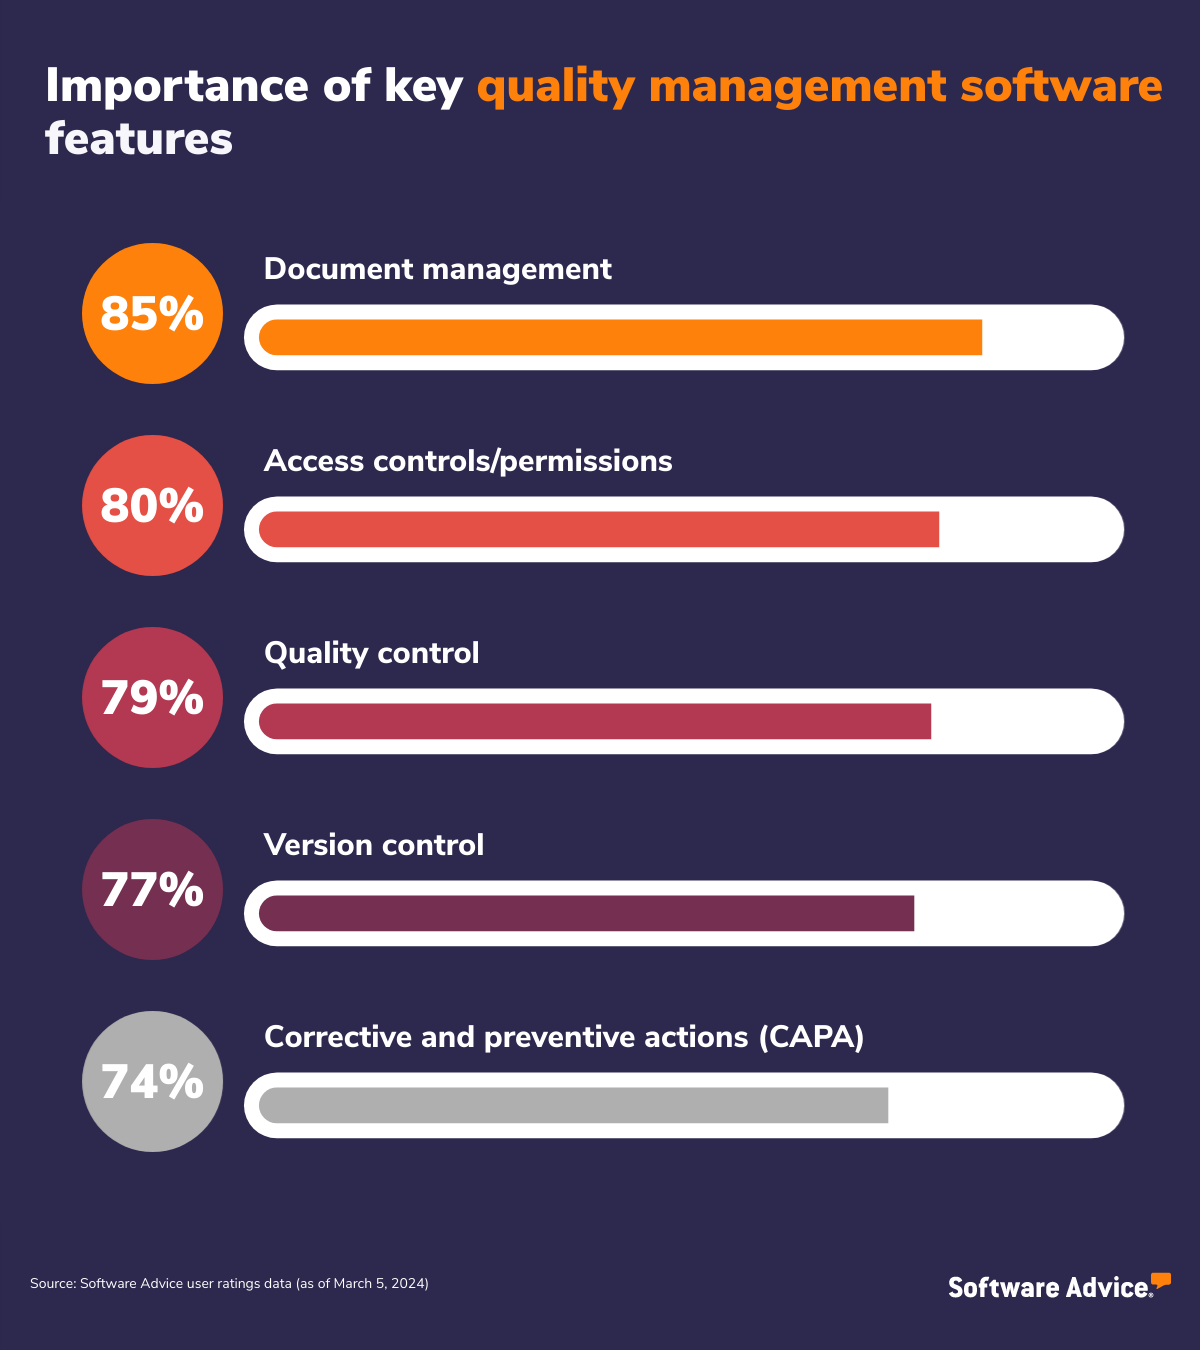 Importance of key quality management software features